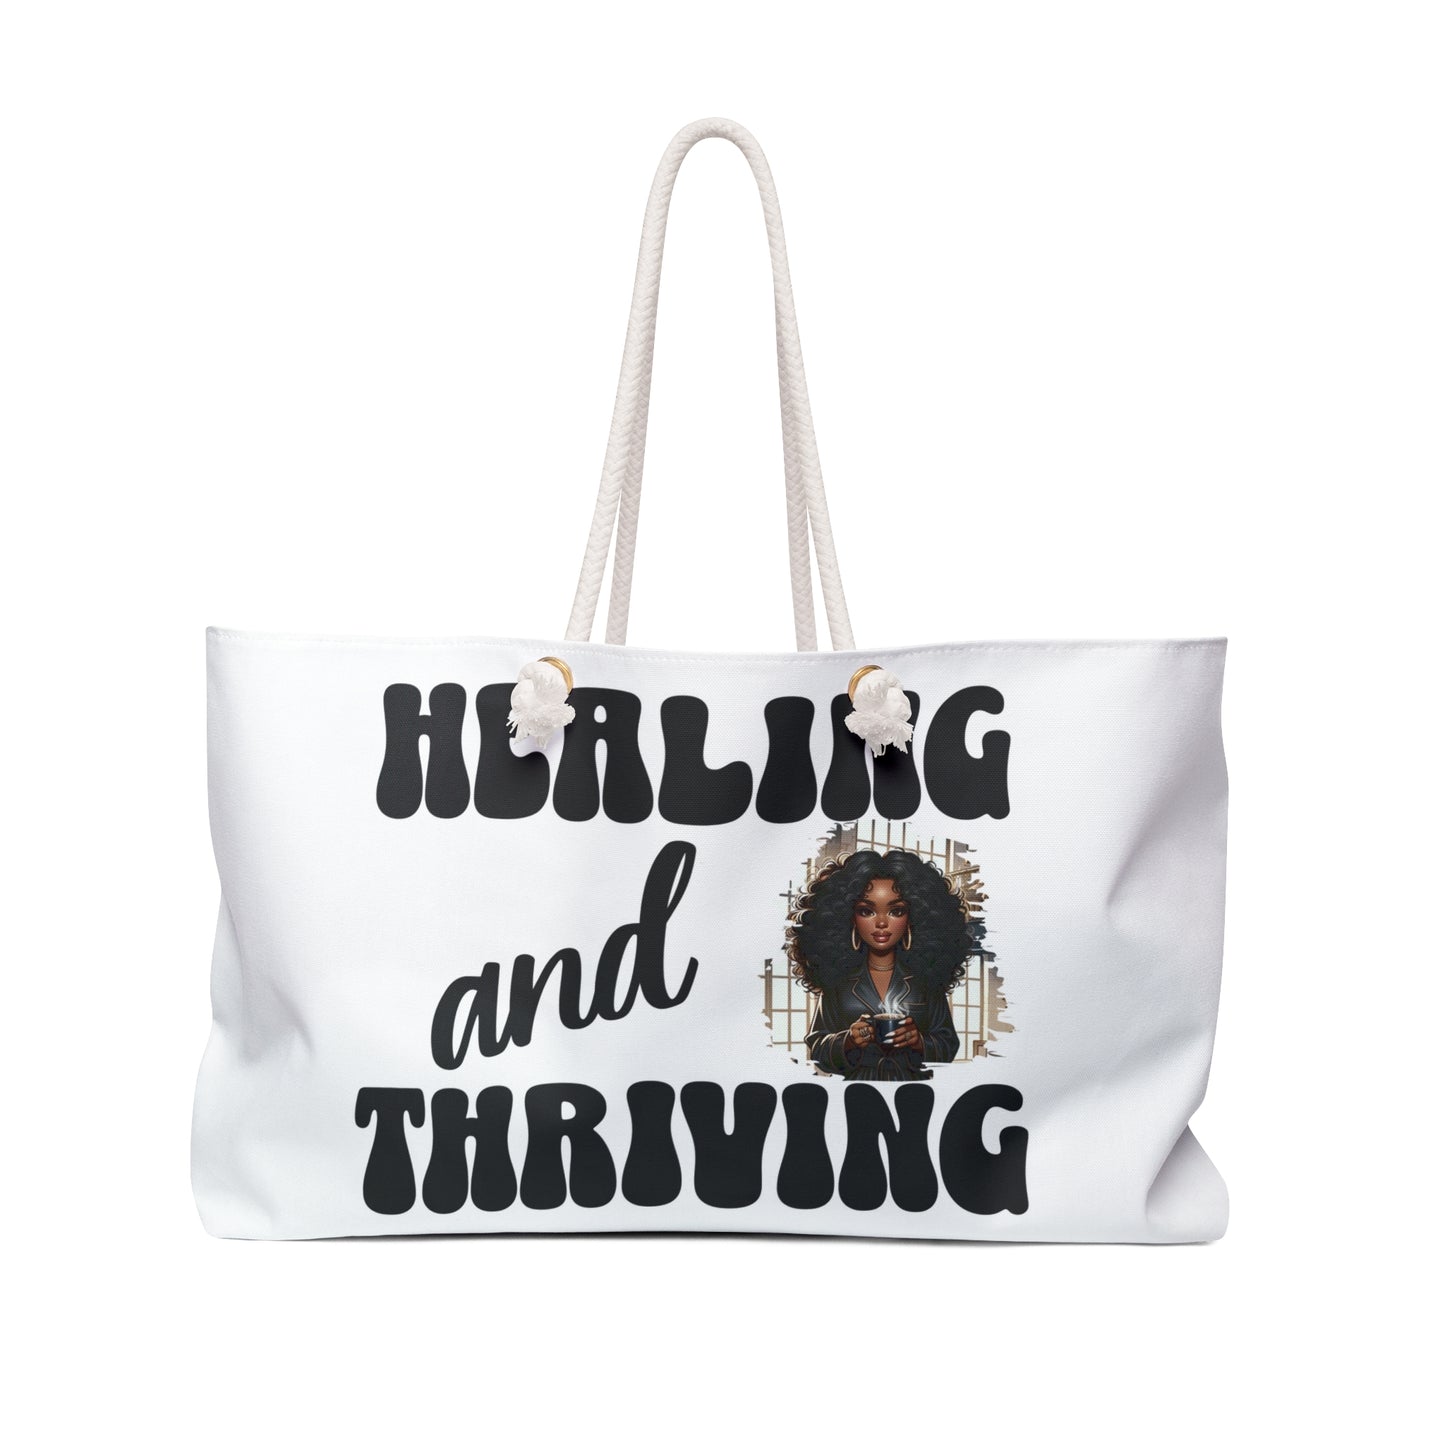 Healing & Thriving; Oversized Weekender Tote (Black and White)